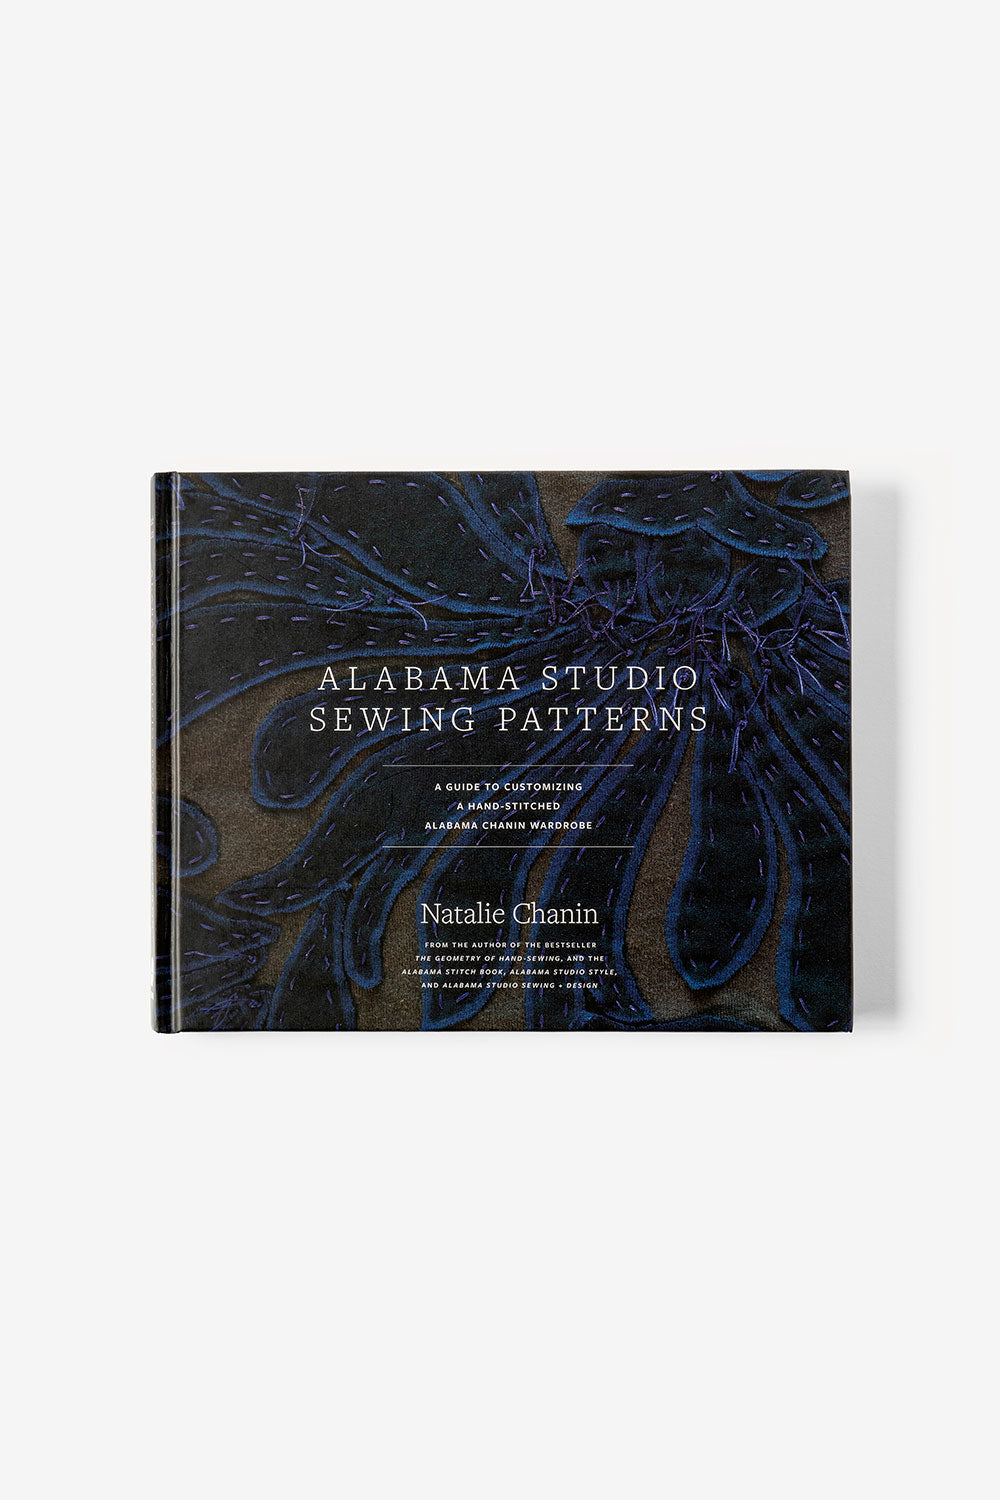 The School of Making Alabama Studio Sewing Patterns by Natalie Chanin Book Cover.